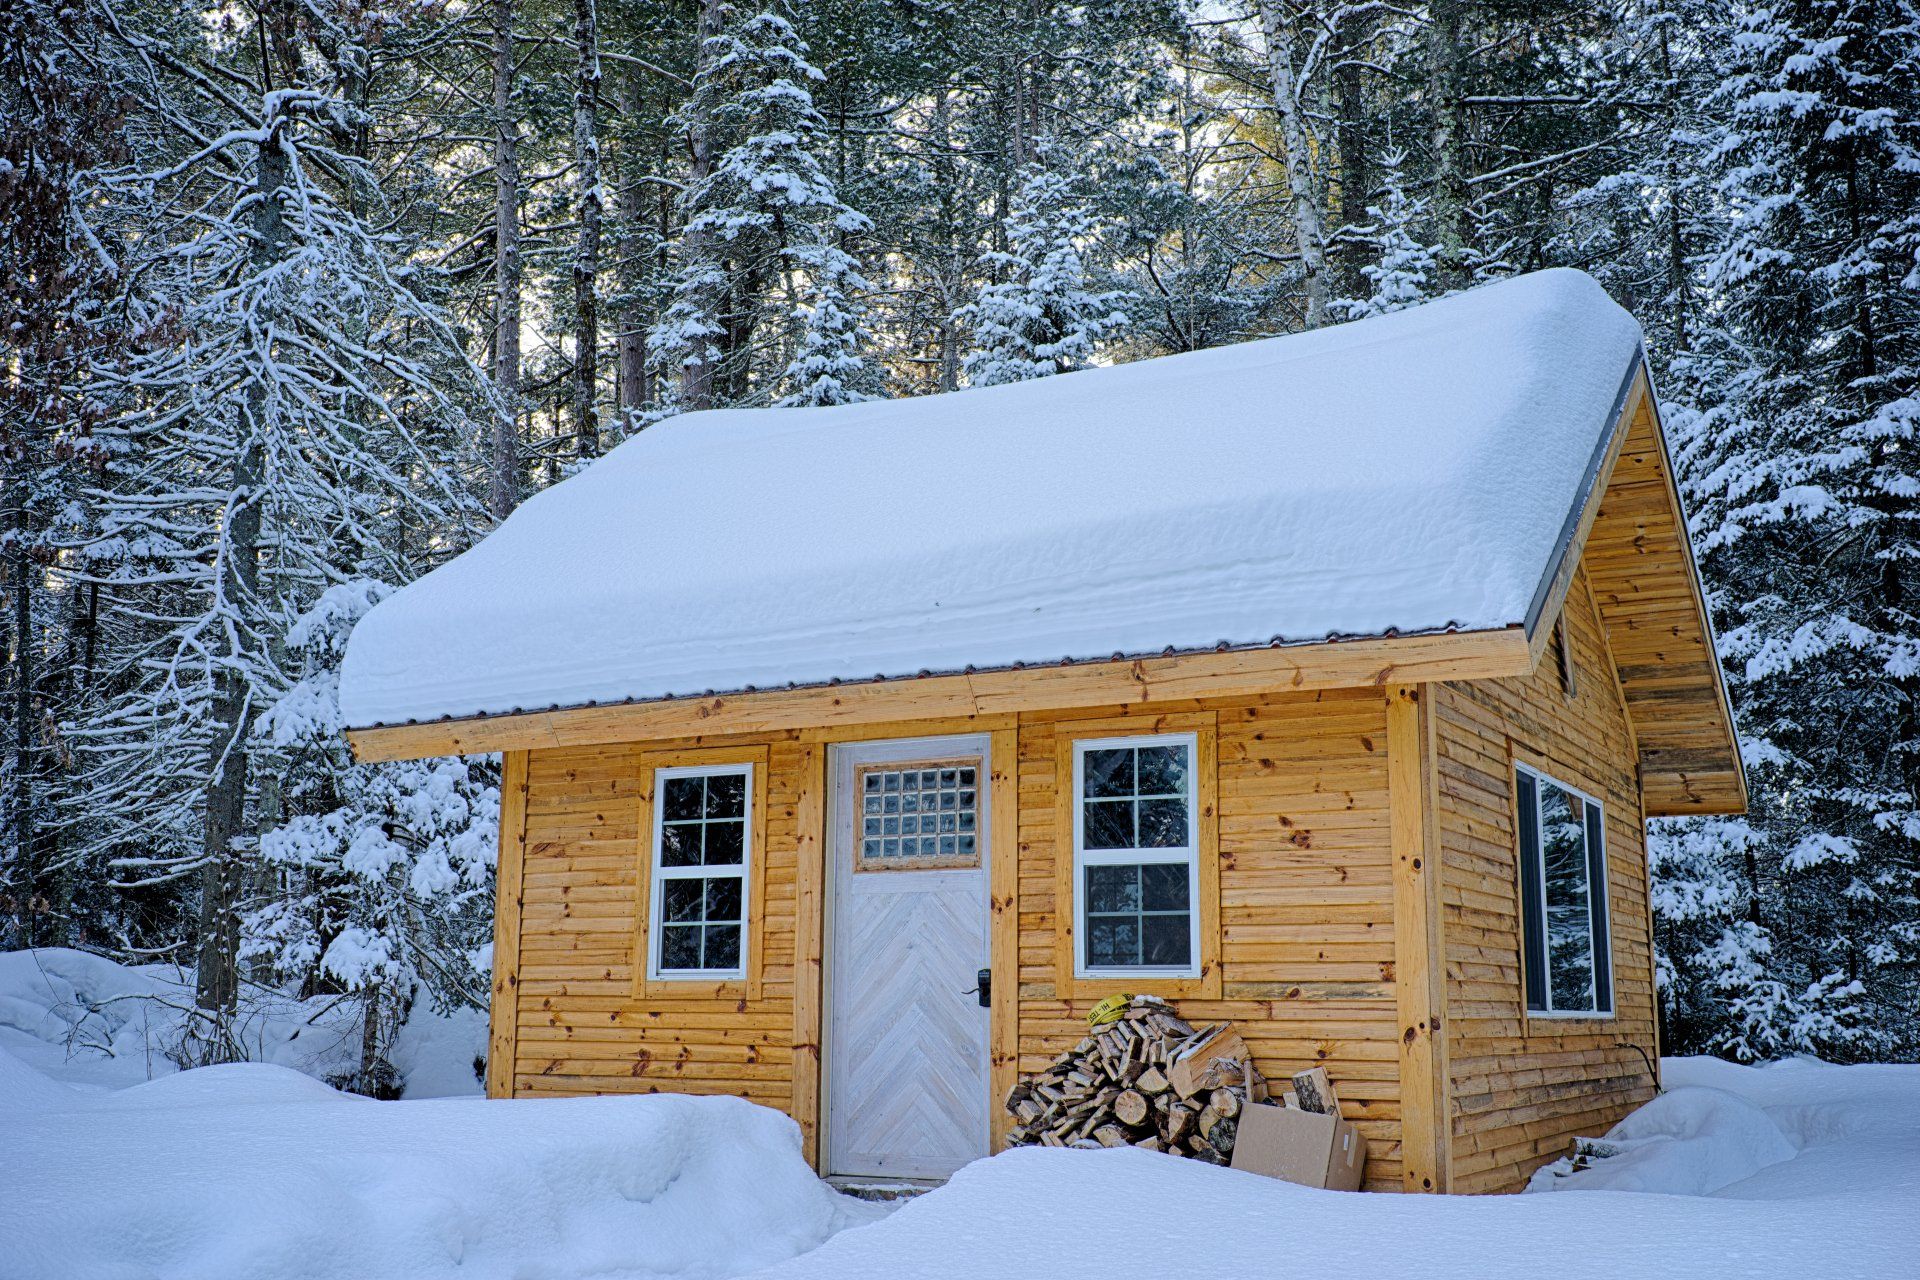 There's snow place like home cabin in the woods